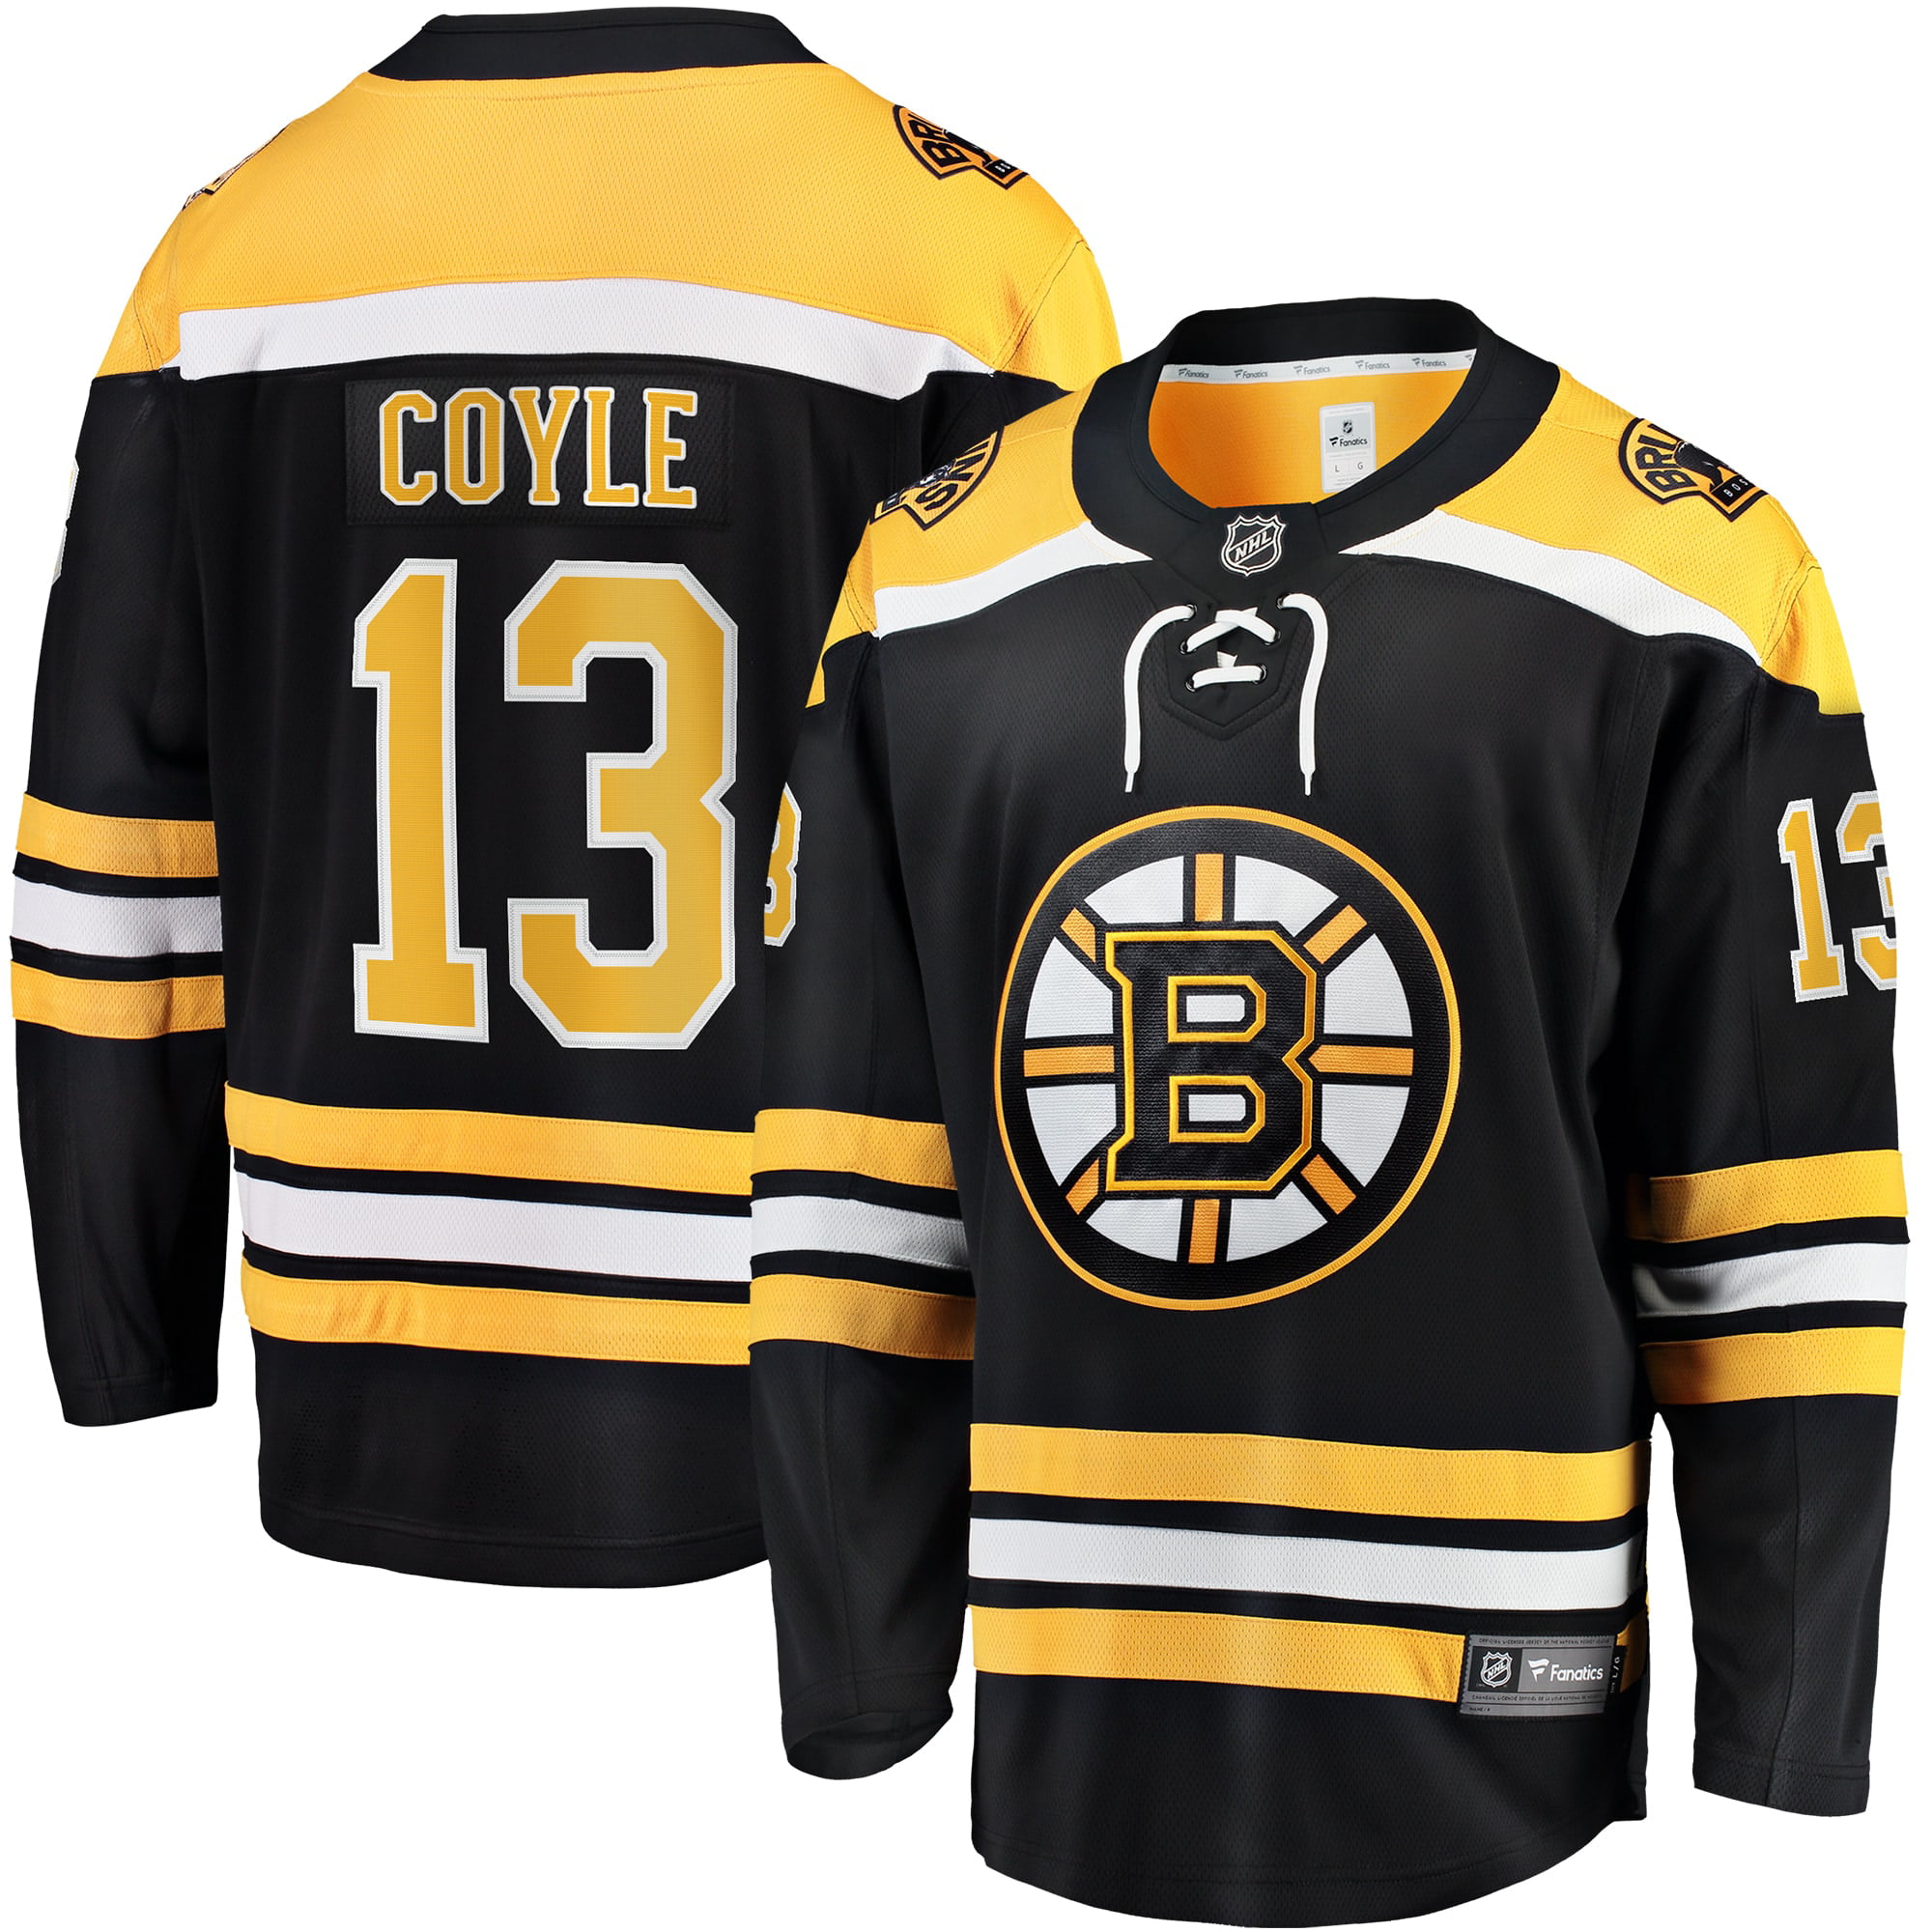 charlie coyle jersey